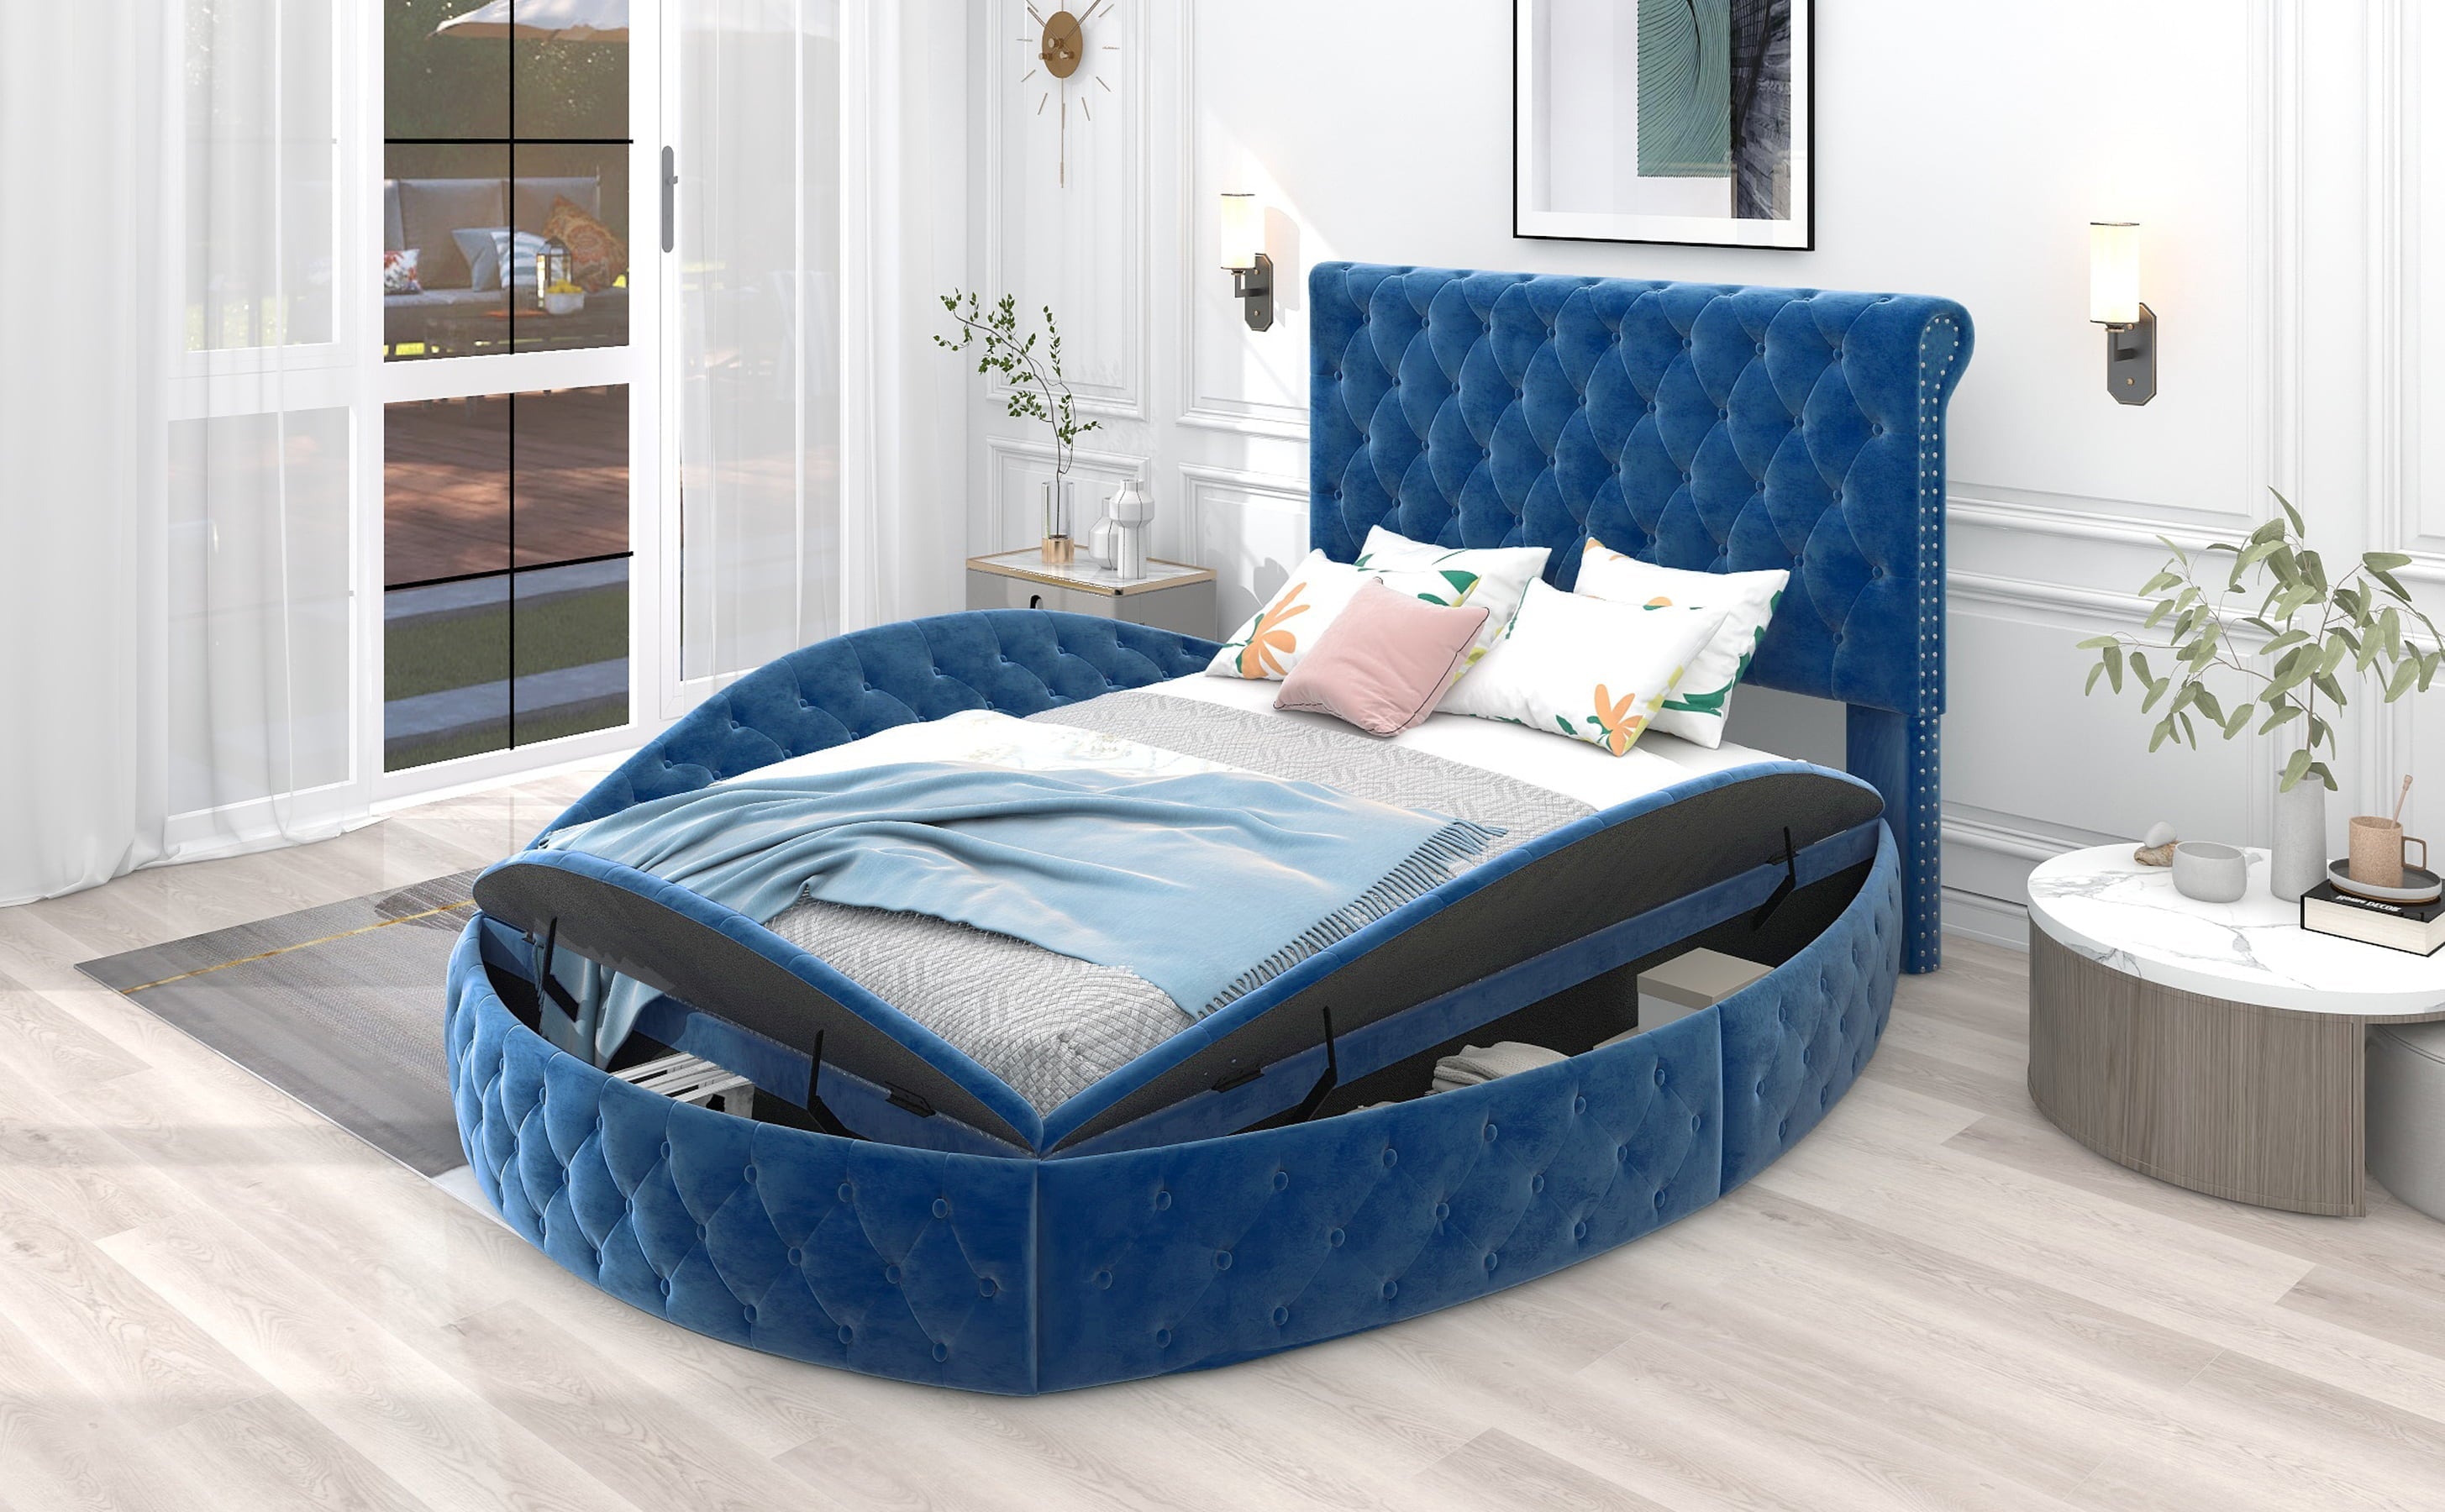 Full Round Upholstery Kids Platform Bed with Storage on Both Sides , Blue